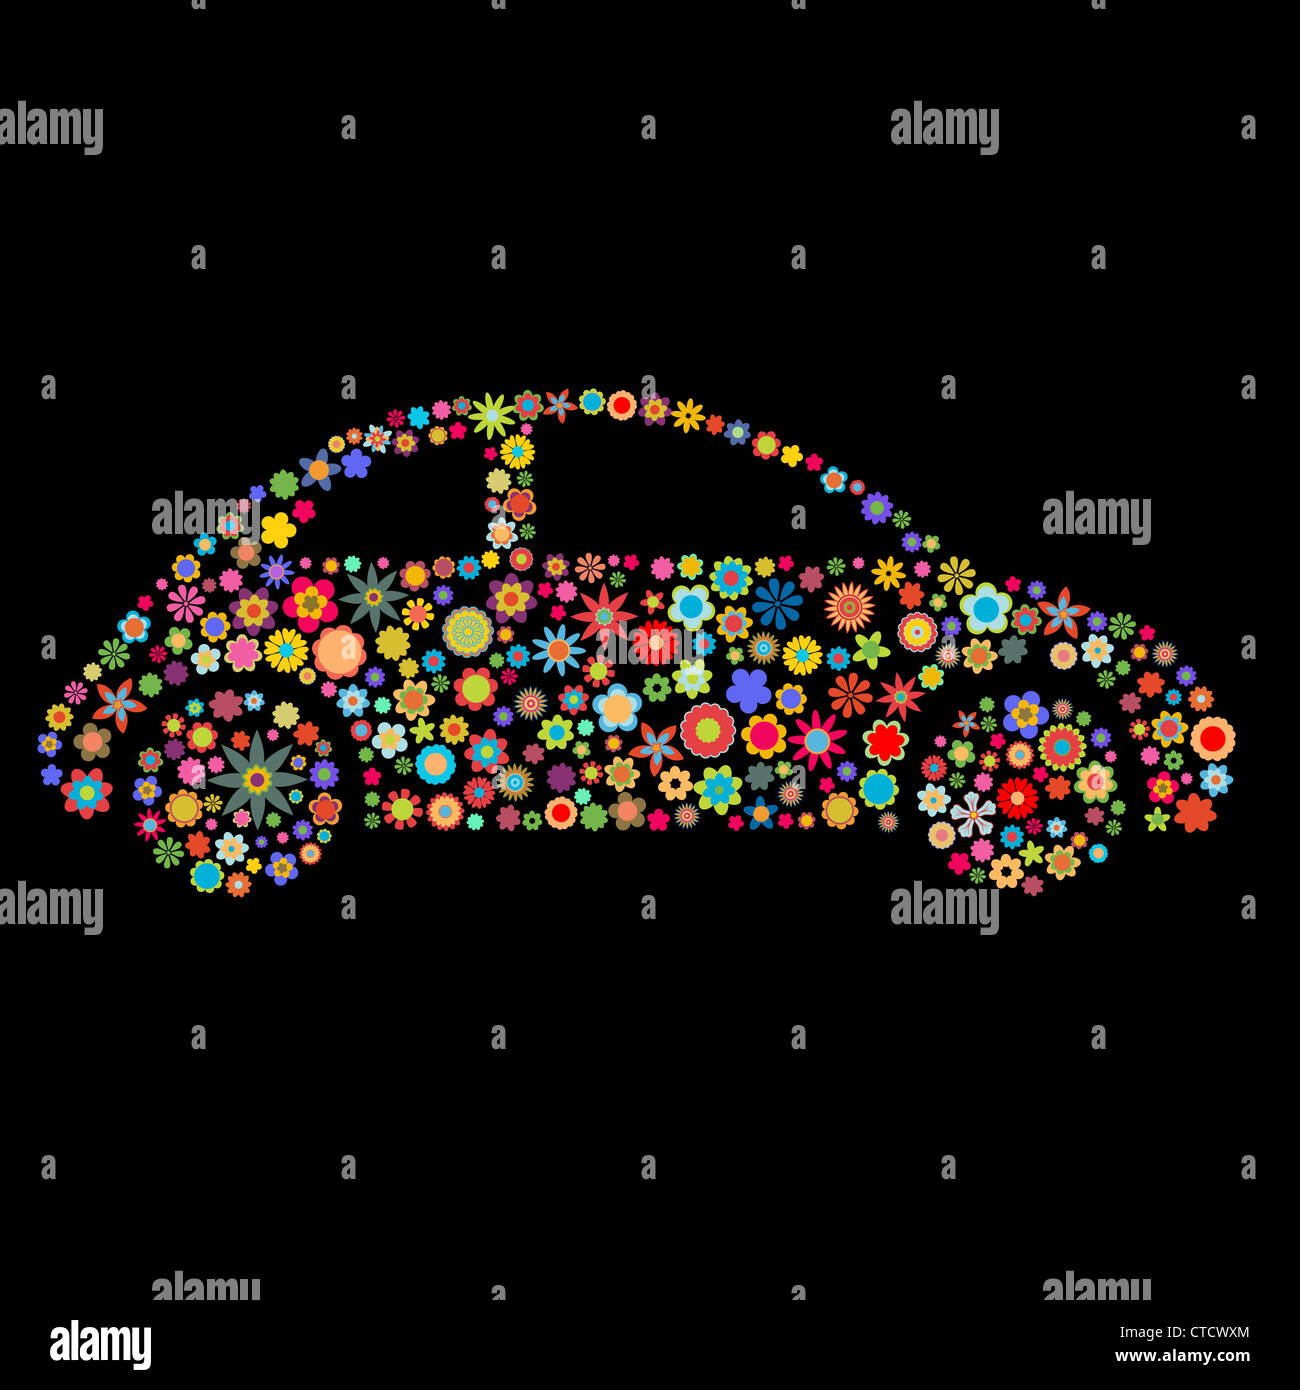 Vector illustration of car shape made up a lot of  multicolored small flowers on the black background Stock Photo